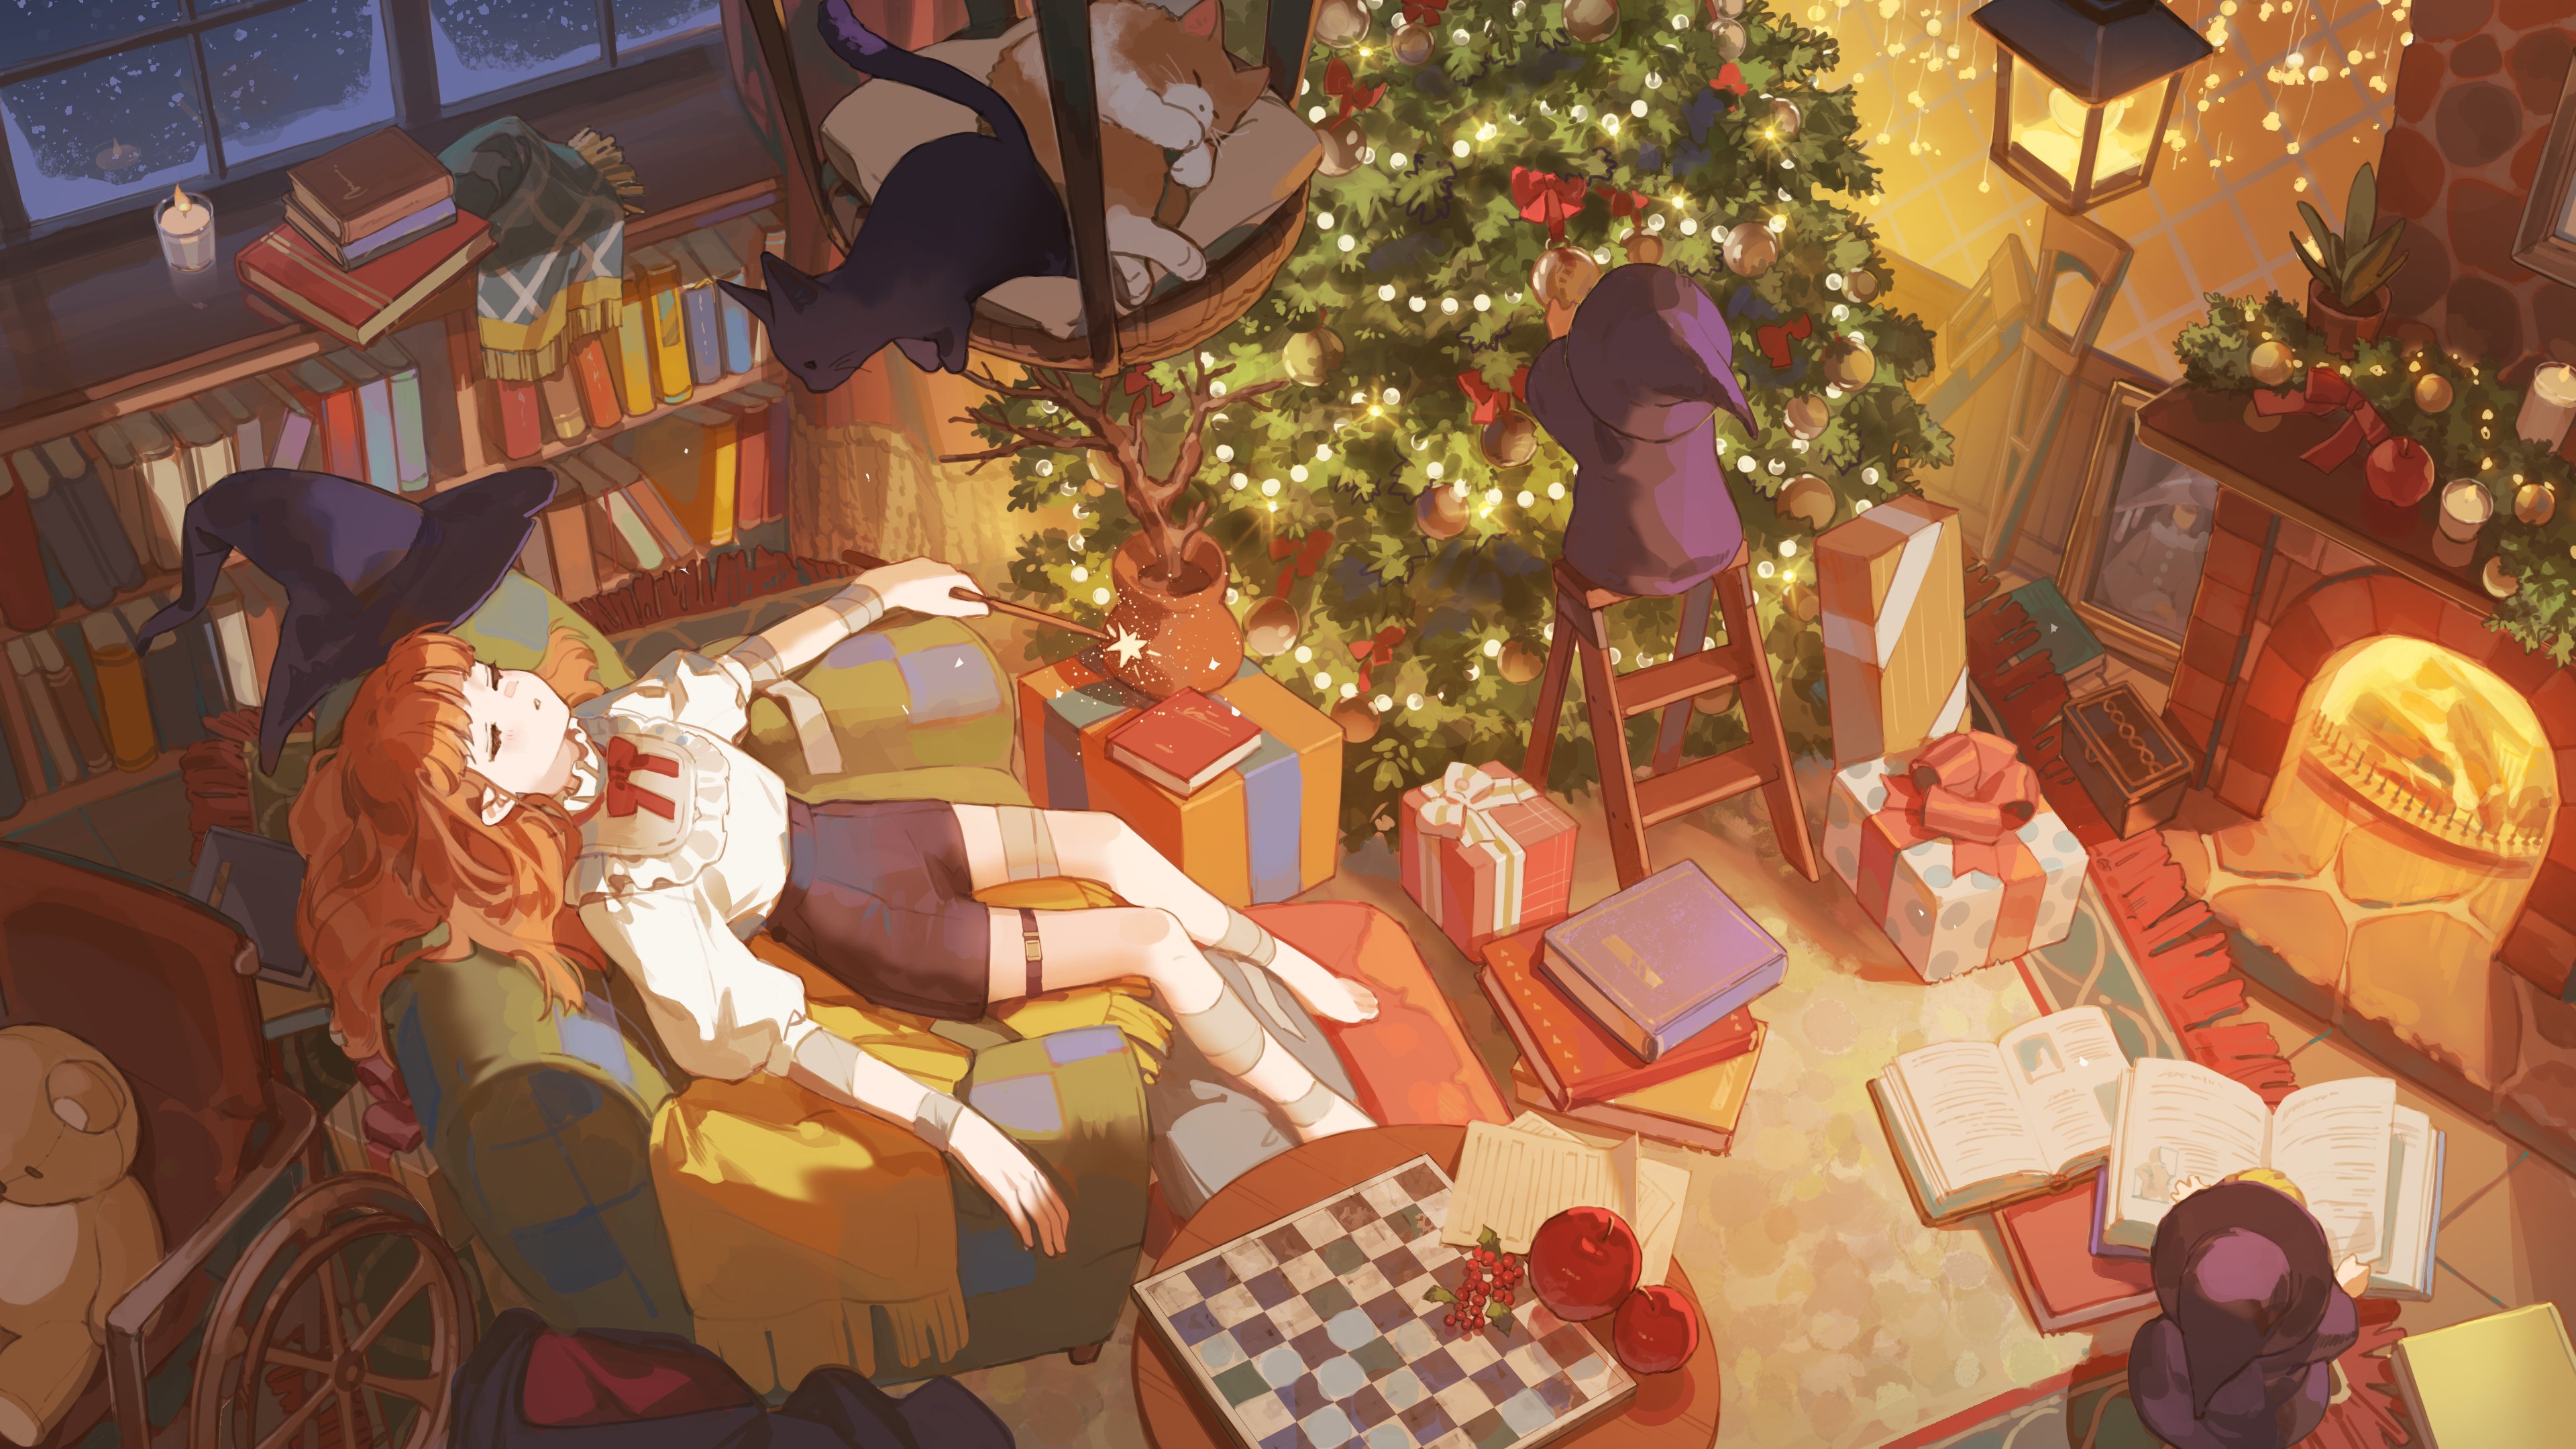 Anime 3840x2160 anime girls high angle Christmas chessboard Christmas tree interior Christmas ornaments  cats armchair fireplace Christmas presents fire lying on back teddy bears wheelchair bandages thigh strap witch hat Ema3 picture frames bookshelves books reading closed eyes sleeping plush toy candles decorations women indoors fruit food witch lantern presents ladder chair indoors box sitting